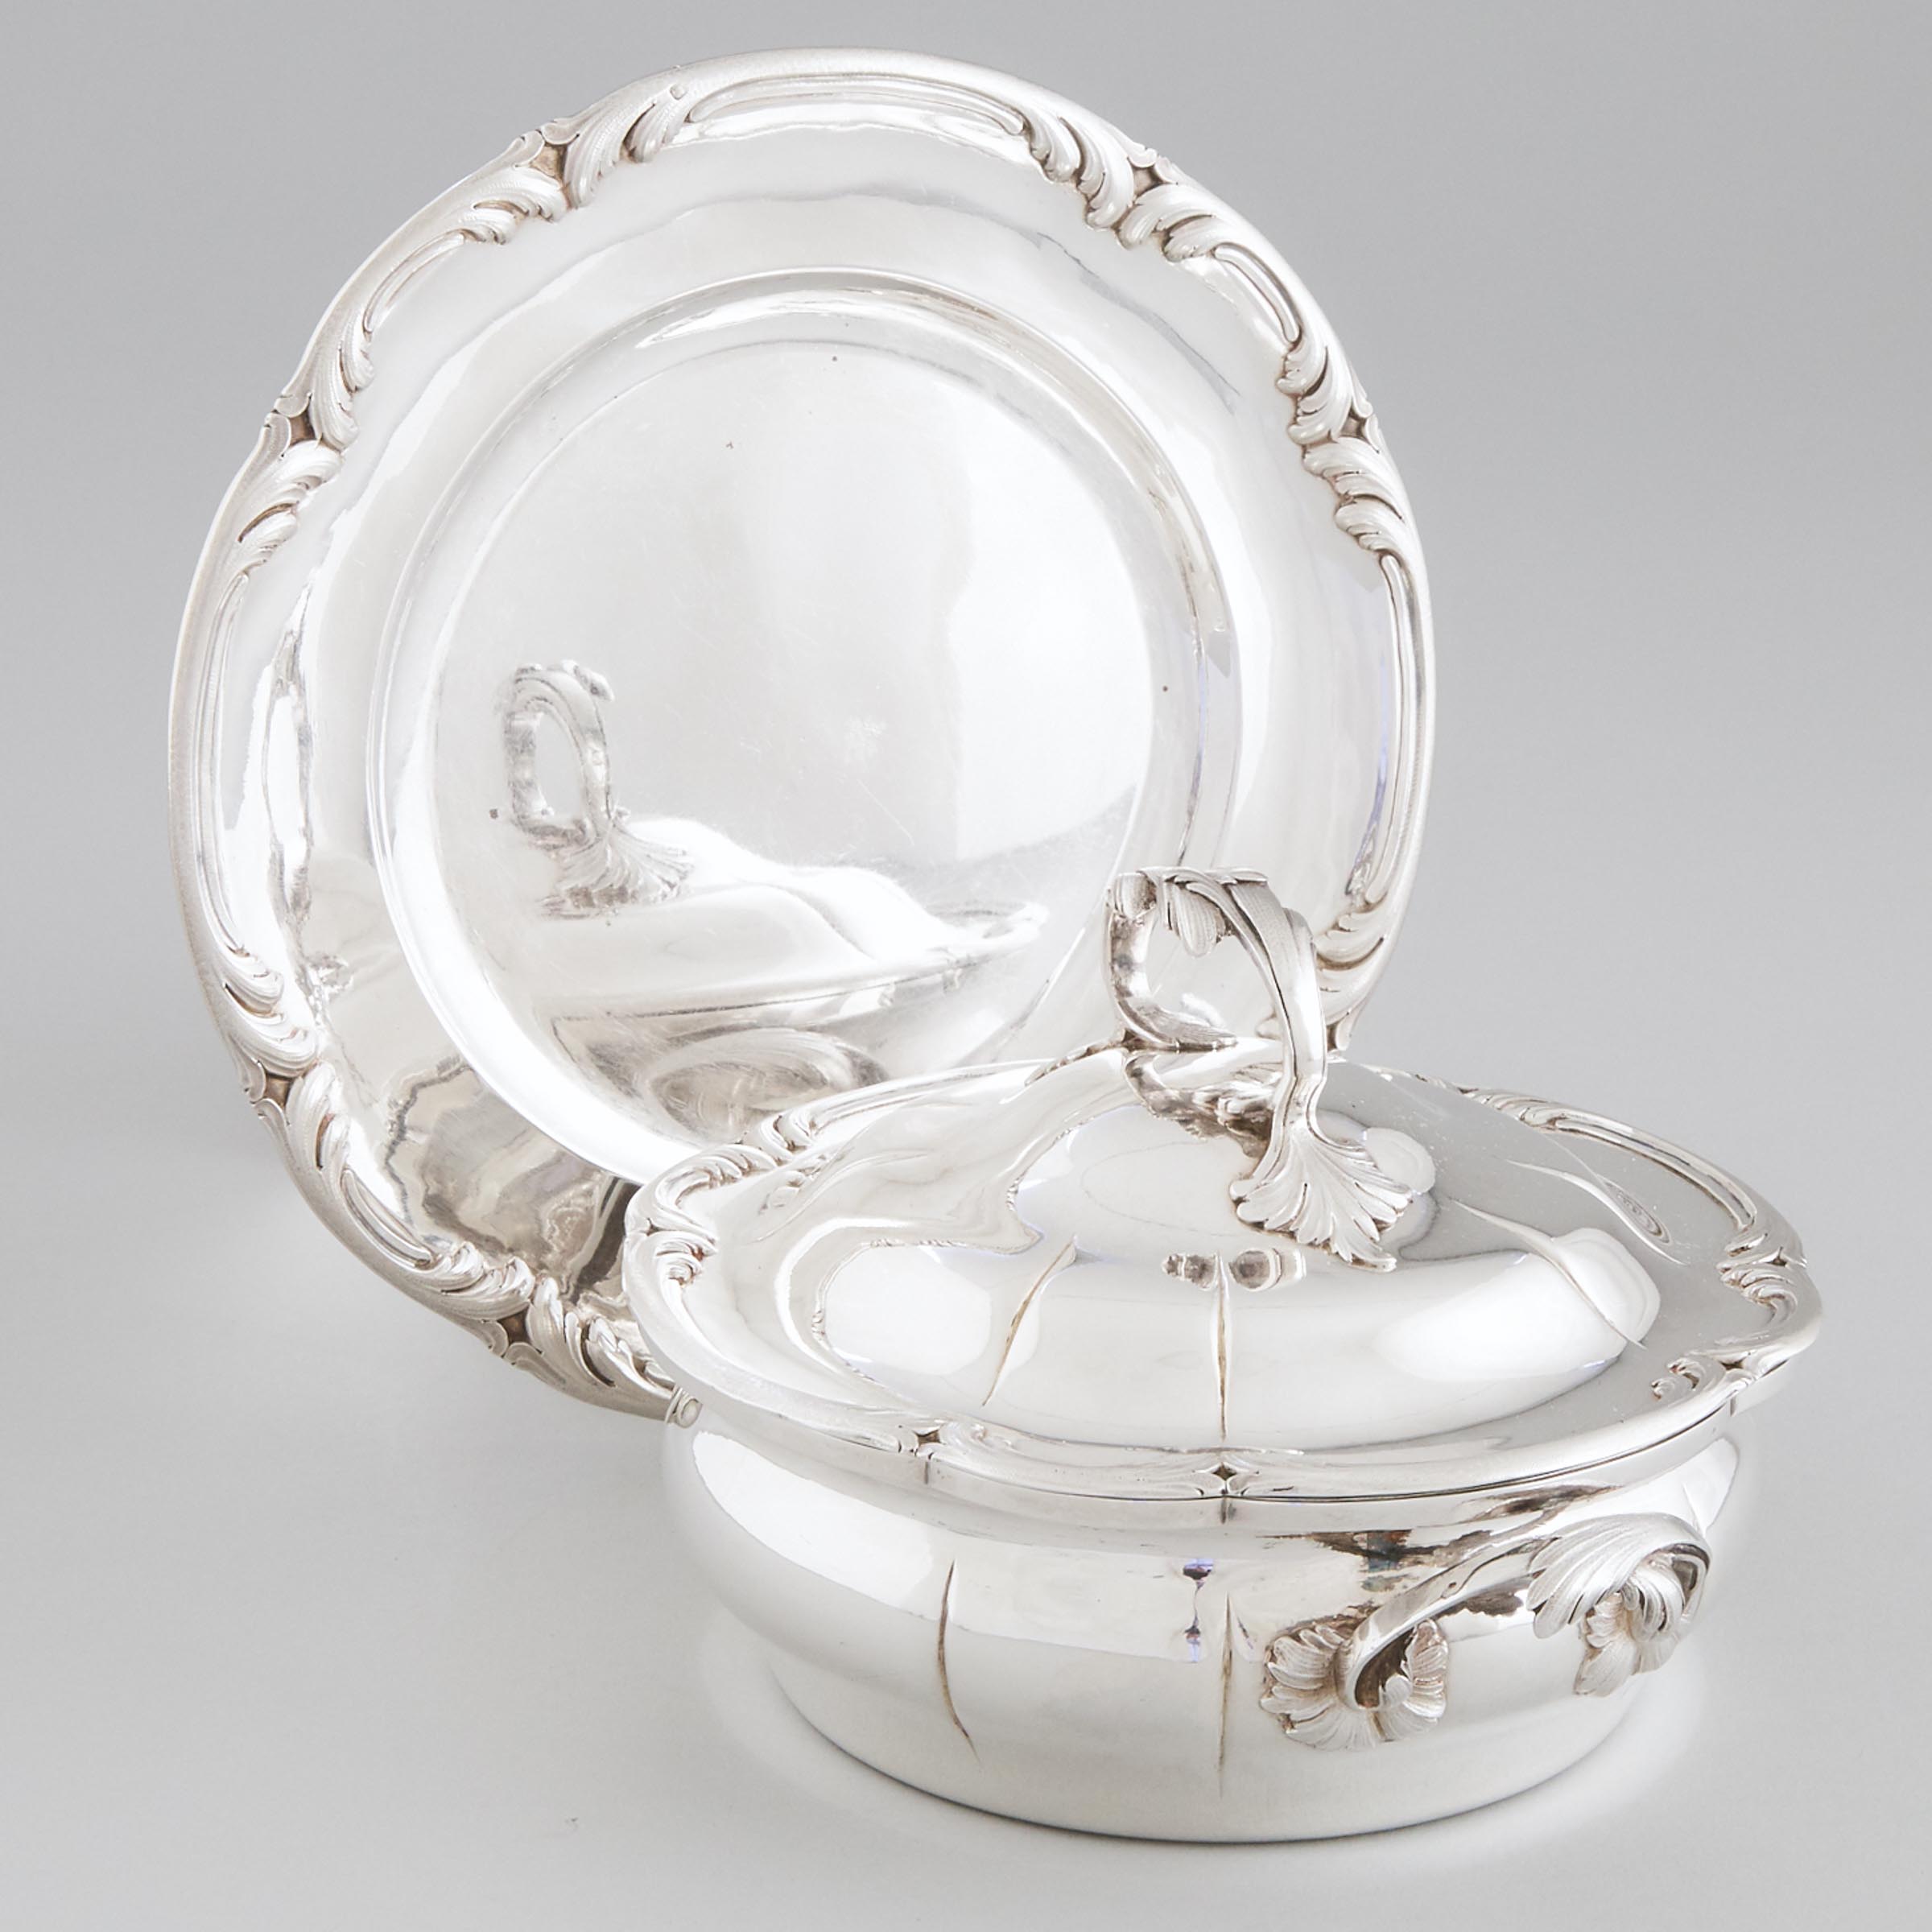 French Silver Two-Handled Covered Bowl and Stand, Odiot, Paris, late 19th century 